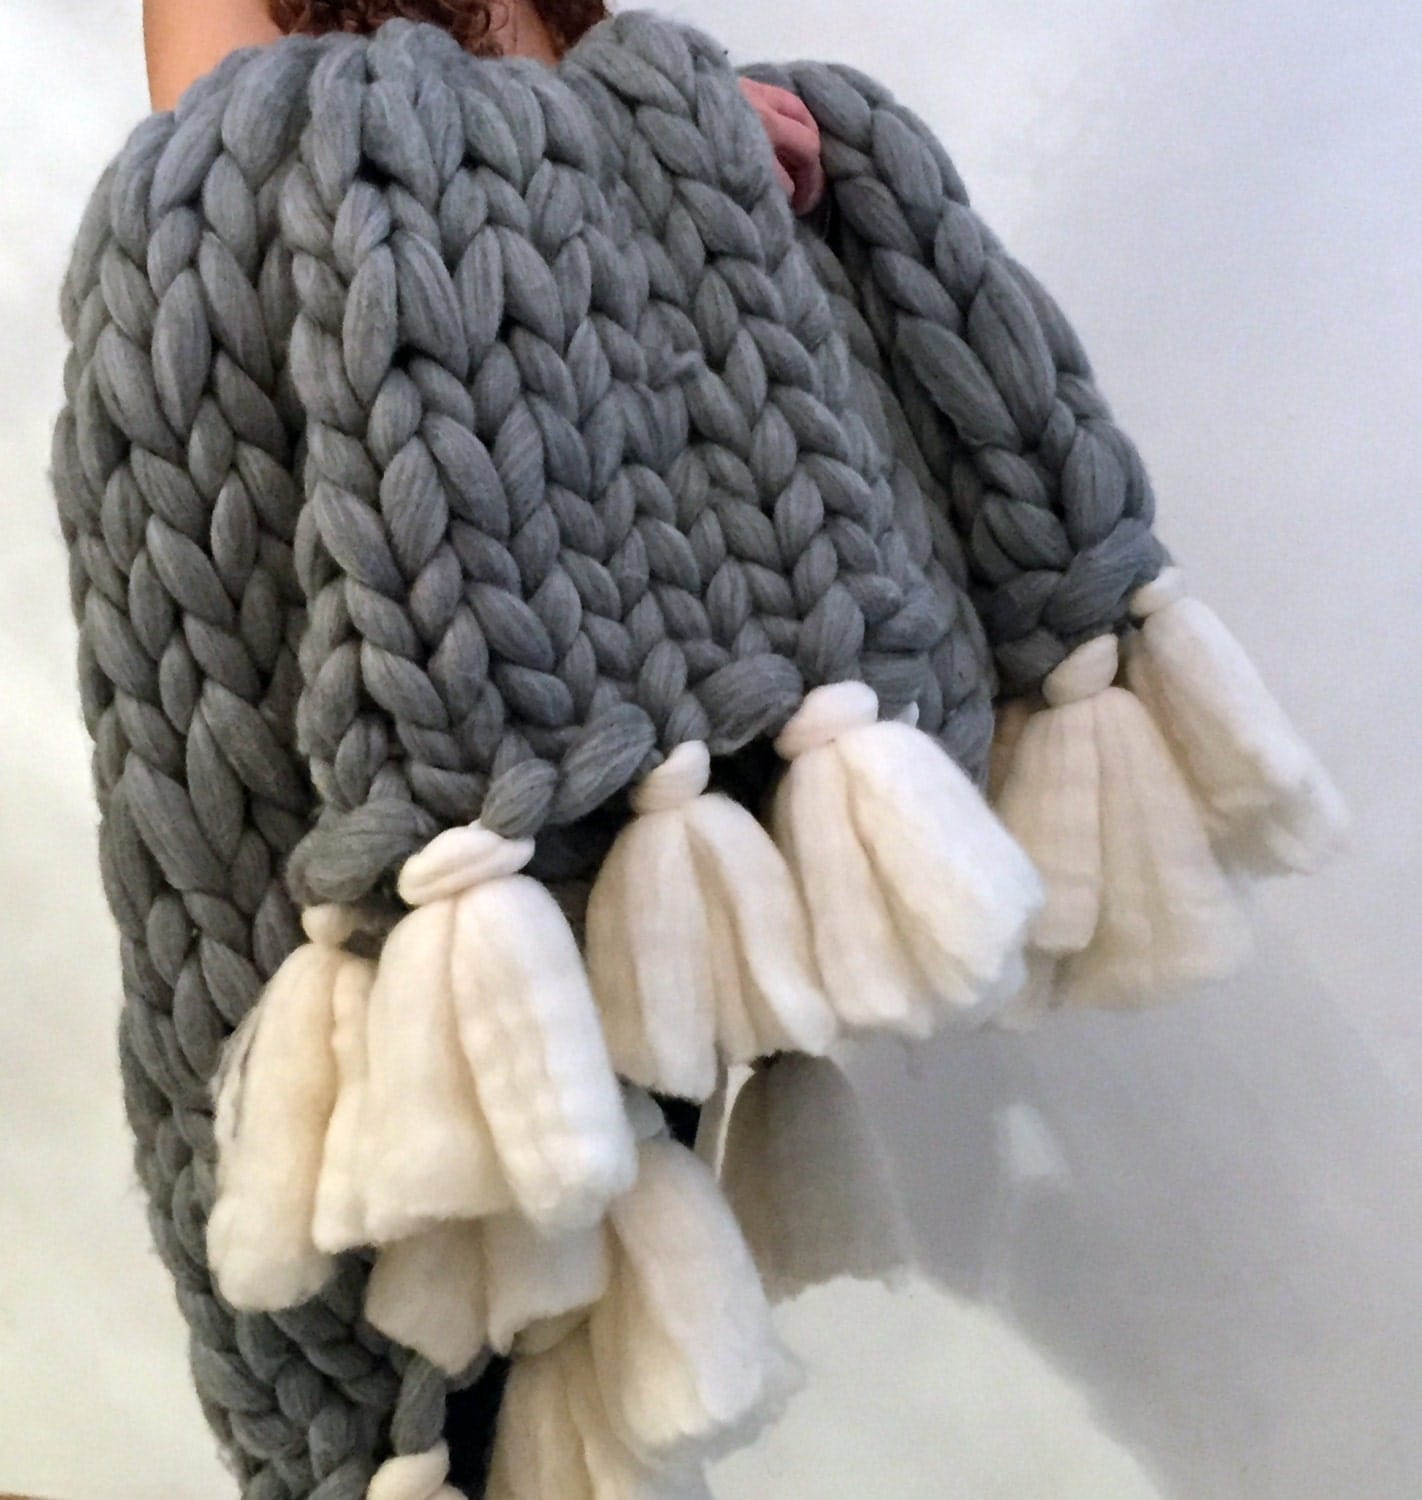 Knitted super chunky blanket. Giant knit throw. by Millsyarn